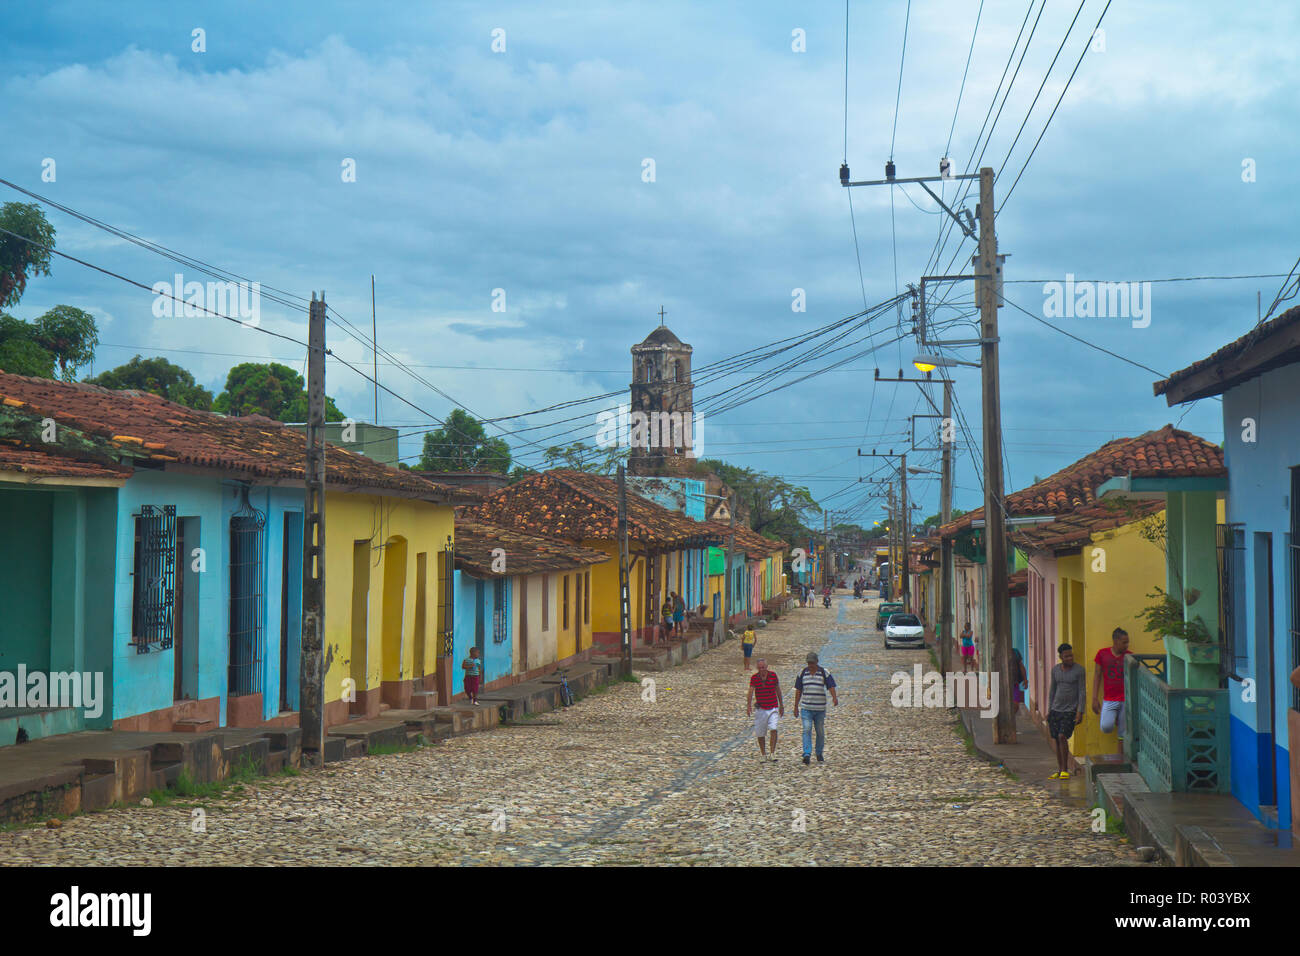 Trinidad is a town in central Cuba, known for its colonial old town and cobblestone streets. Stock Photo